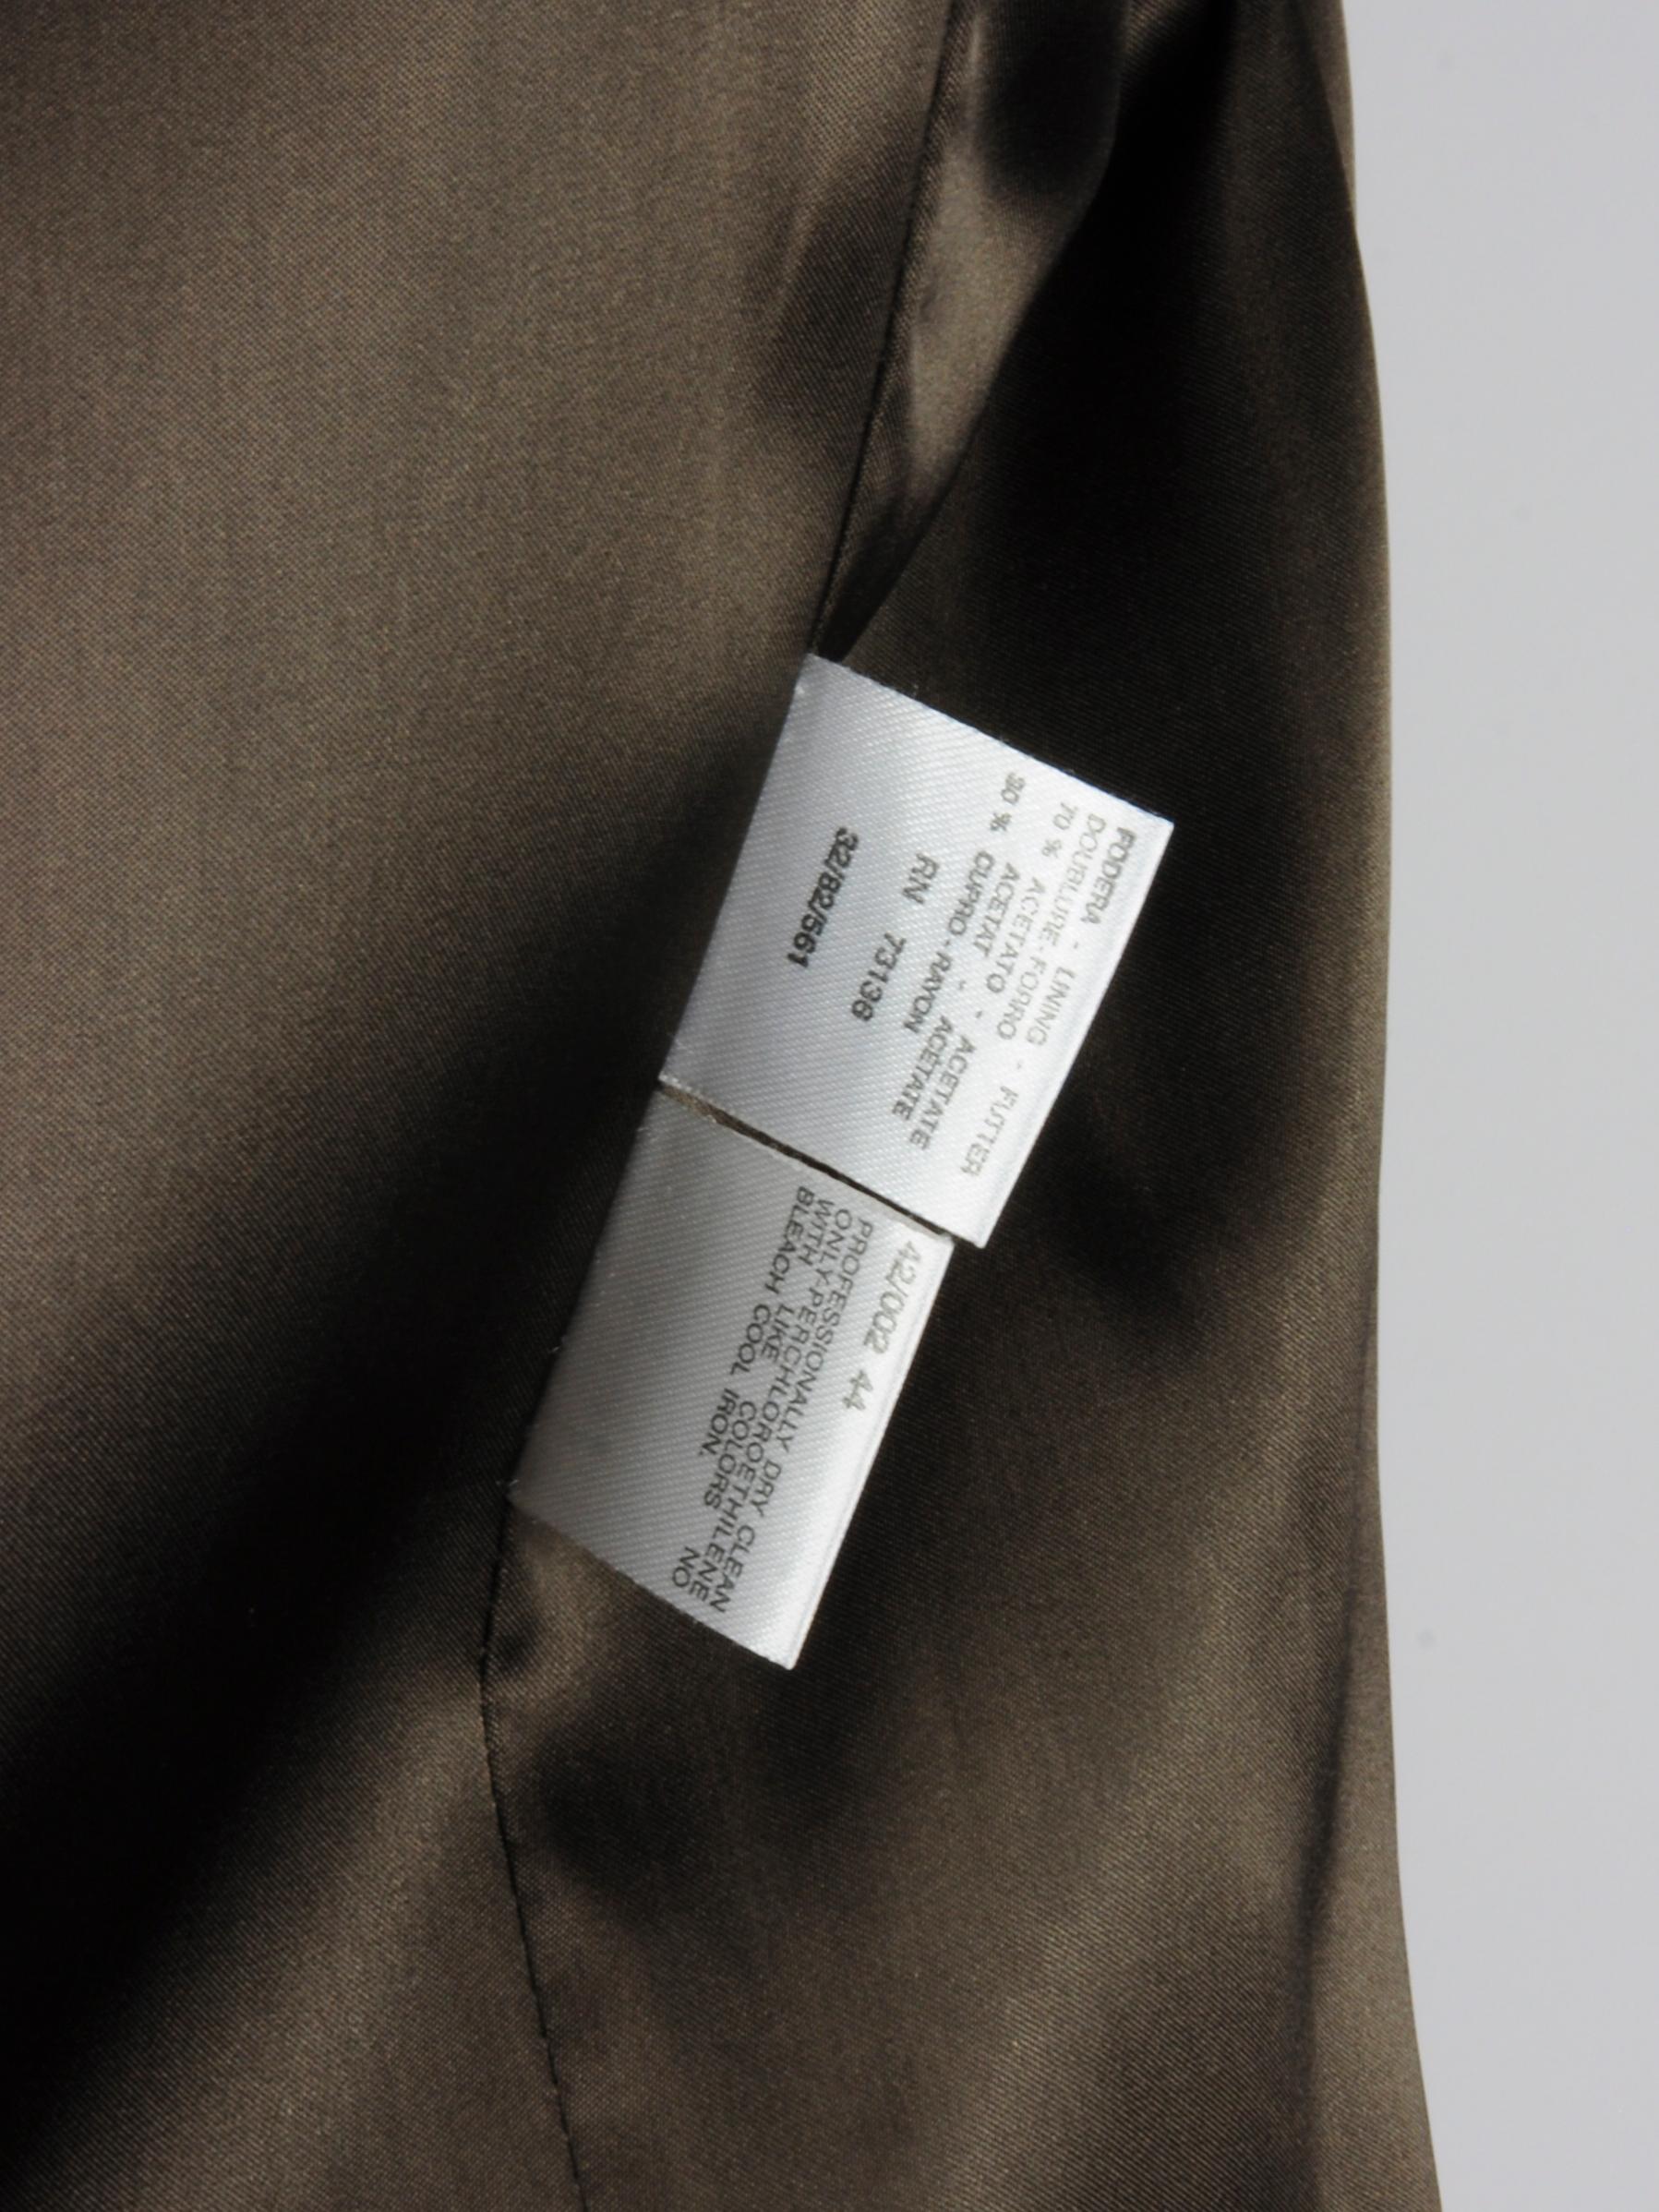 Max Mara Brown Coat Single Breasted Wool and Silk 1990s For Sale 7